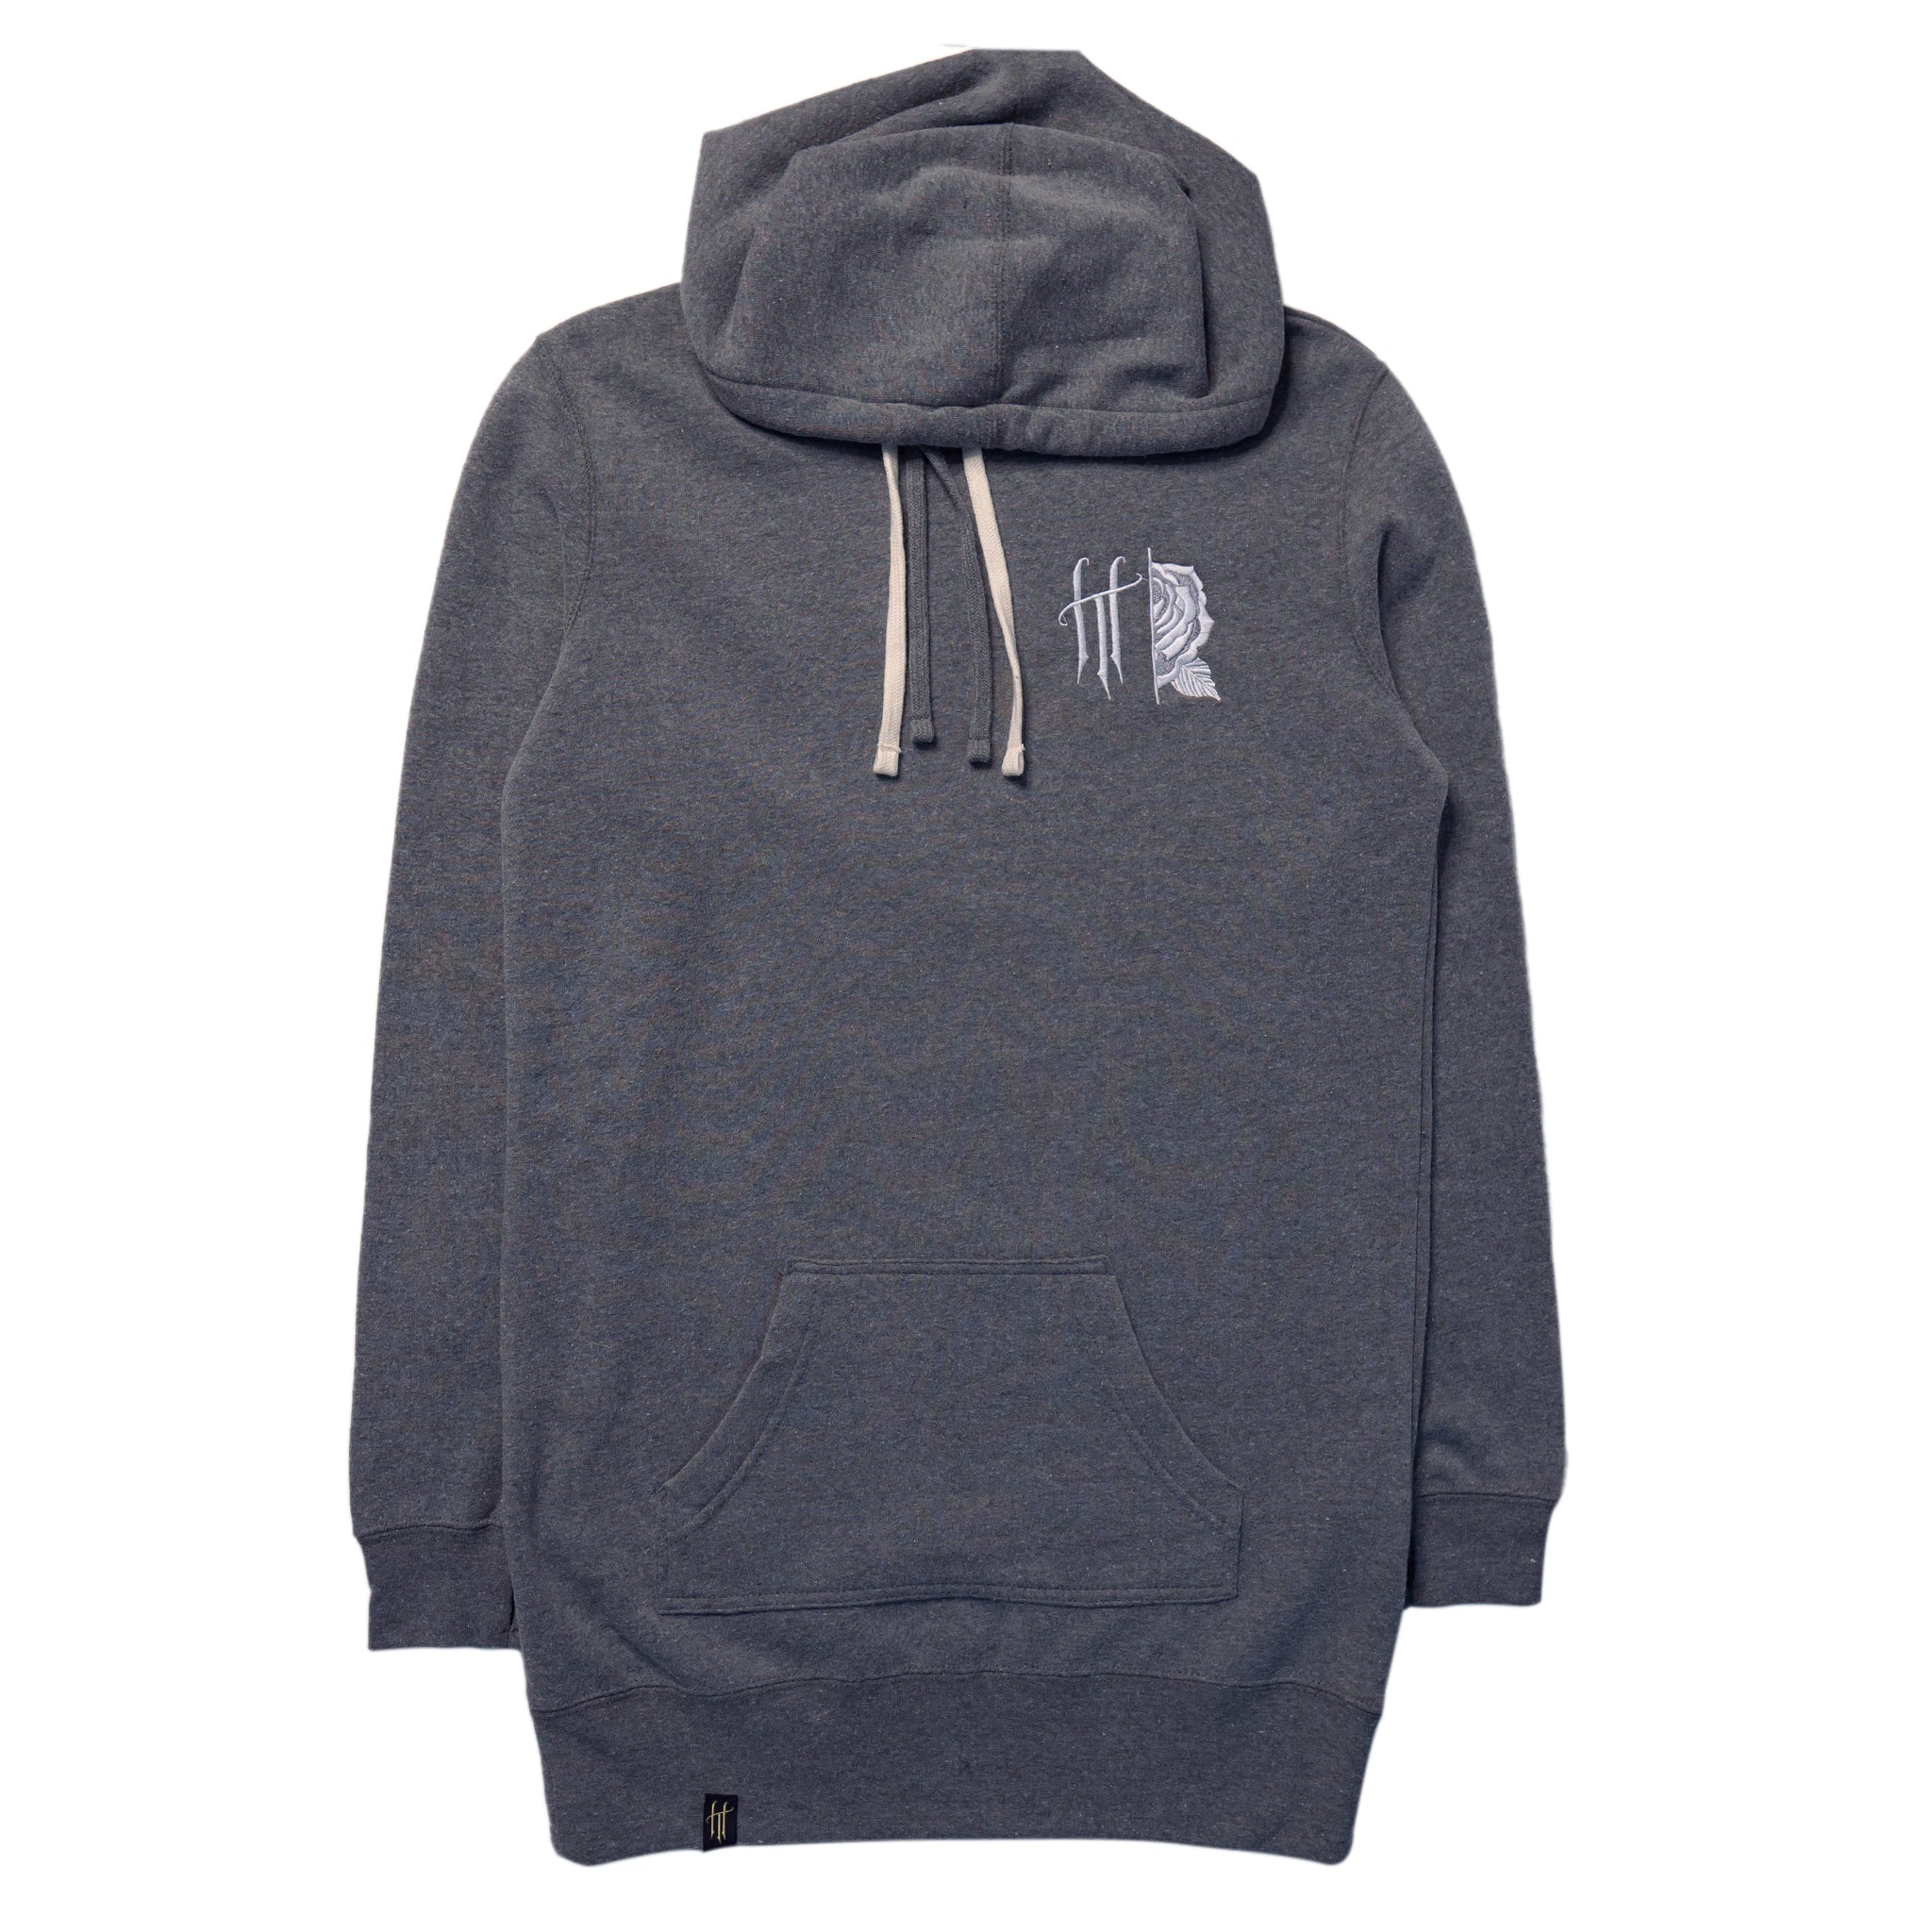 Horrific Thoughts Hooded Pullover Dress (Heather Grey)